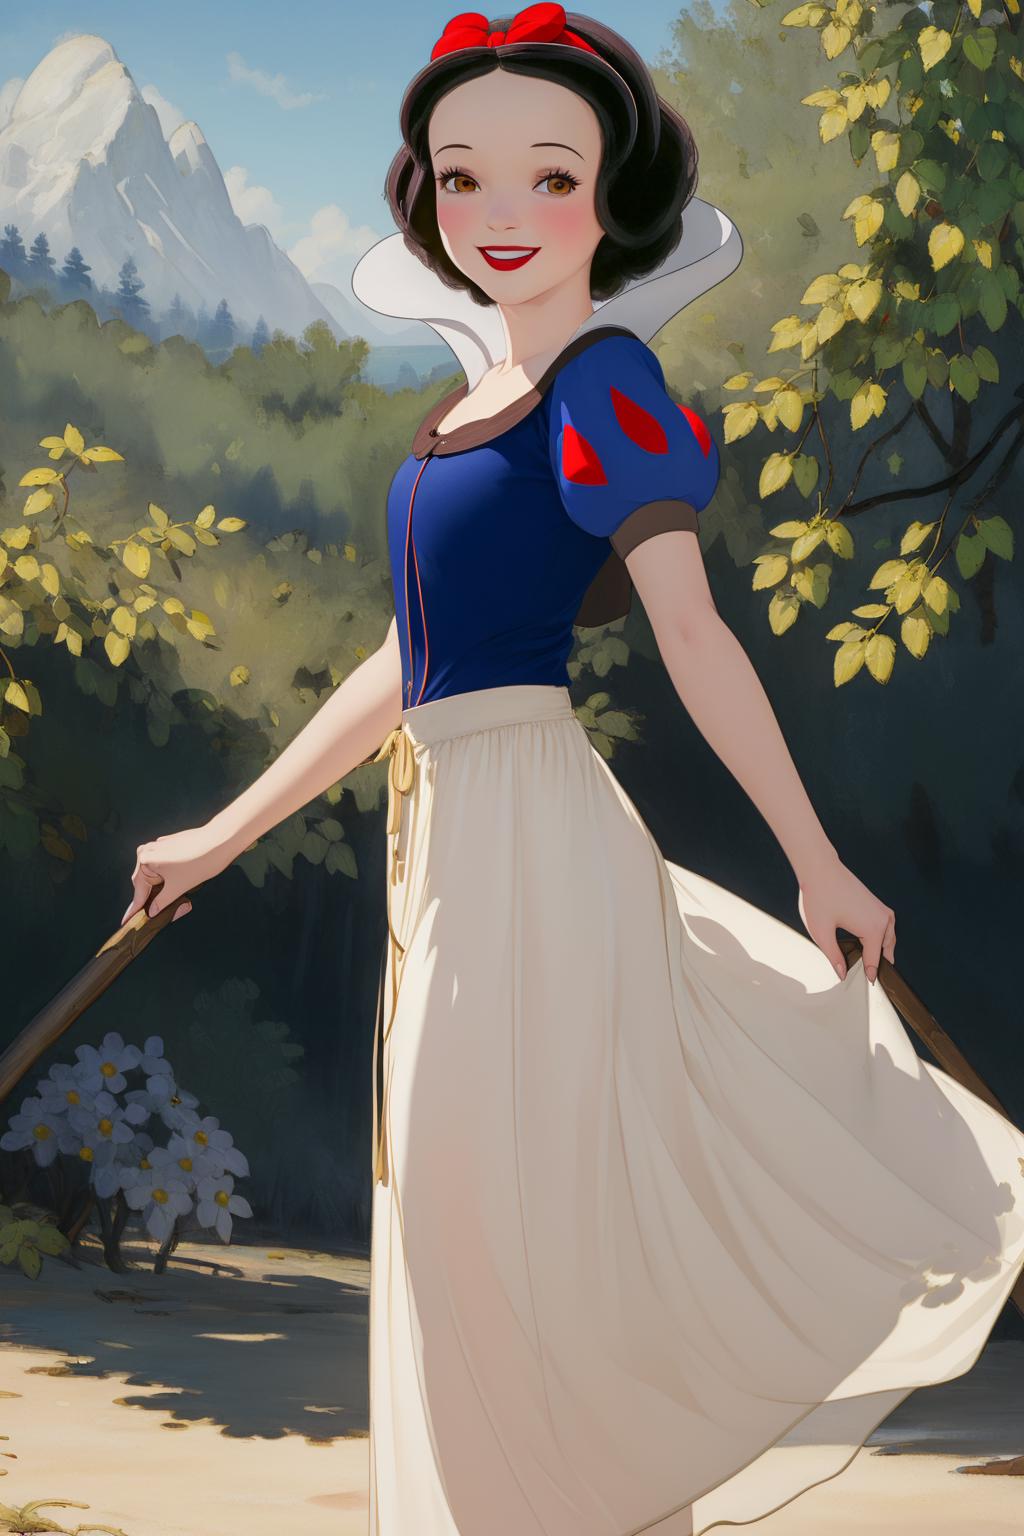 Snow White image by chrgg